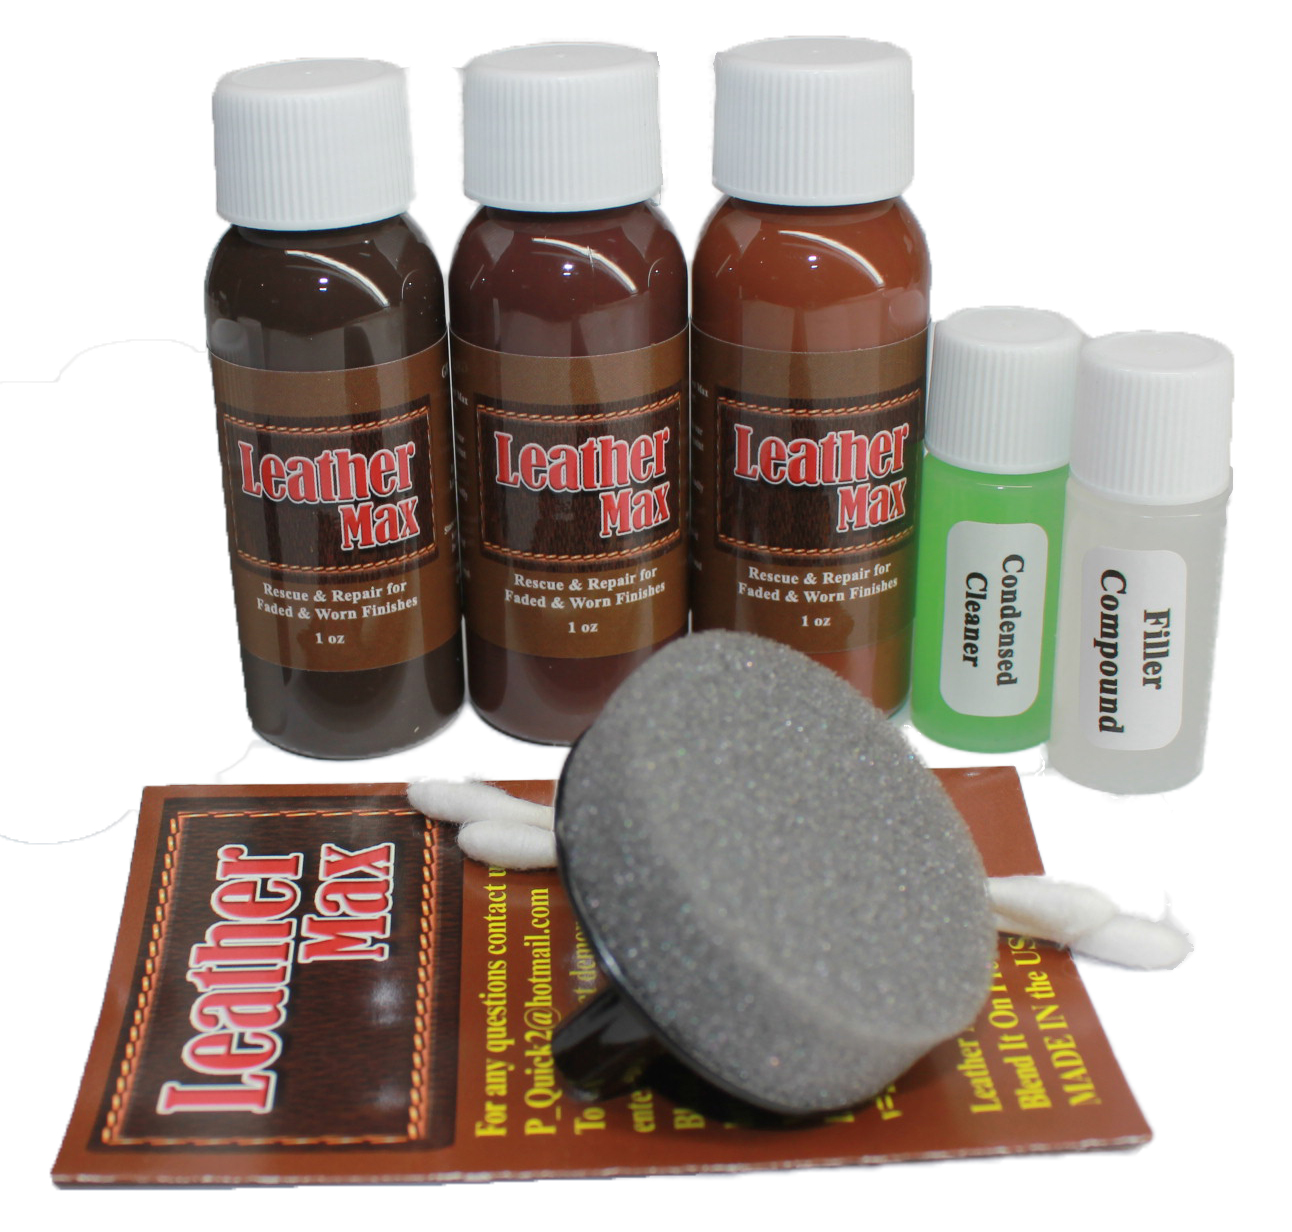 Leather Repair and Refinish for Handbags / Shoes / Boots / Jackets / Leather Max (Brown Mix) - image 1 of 8